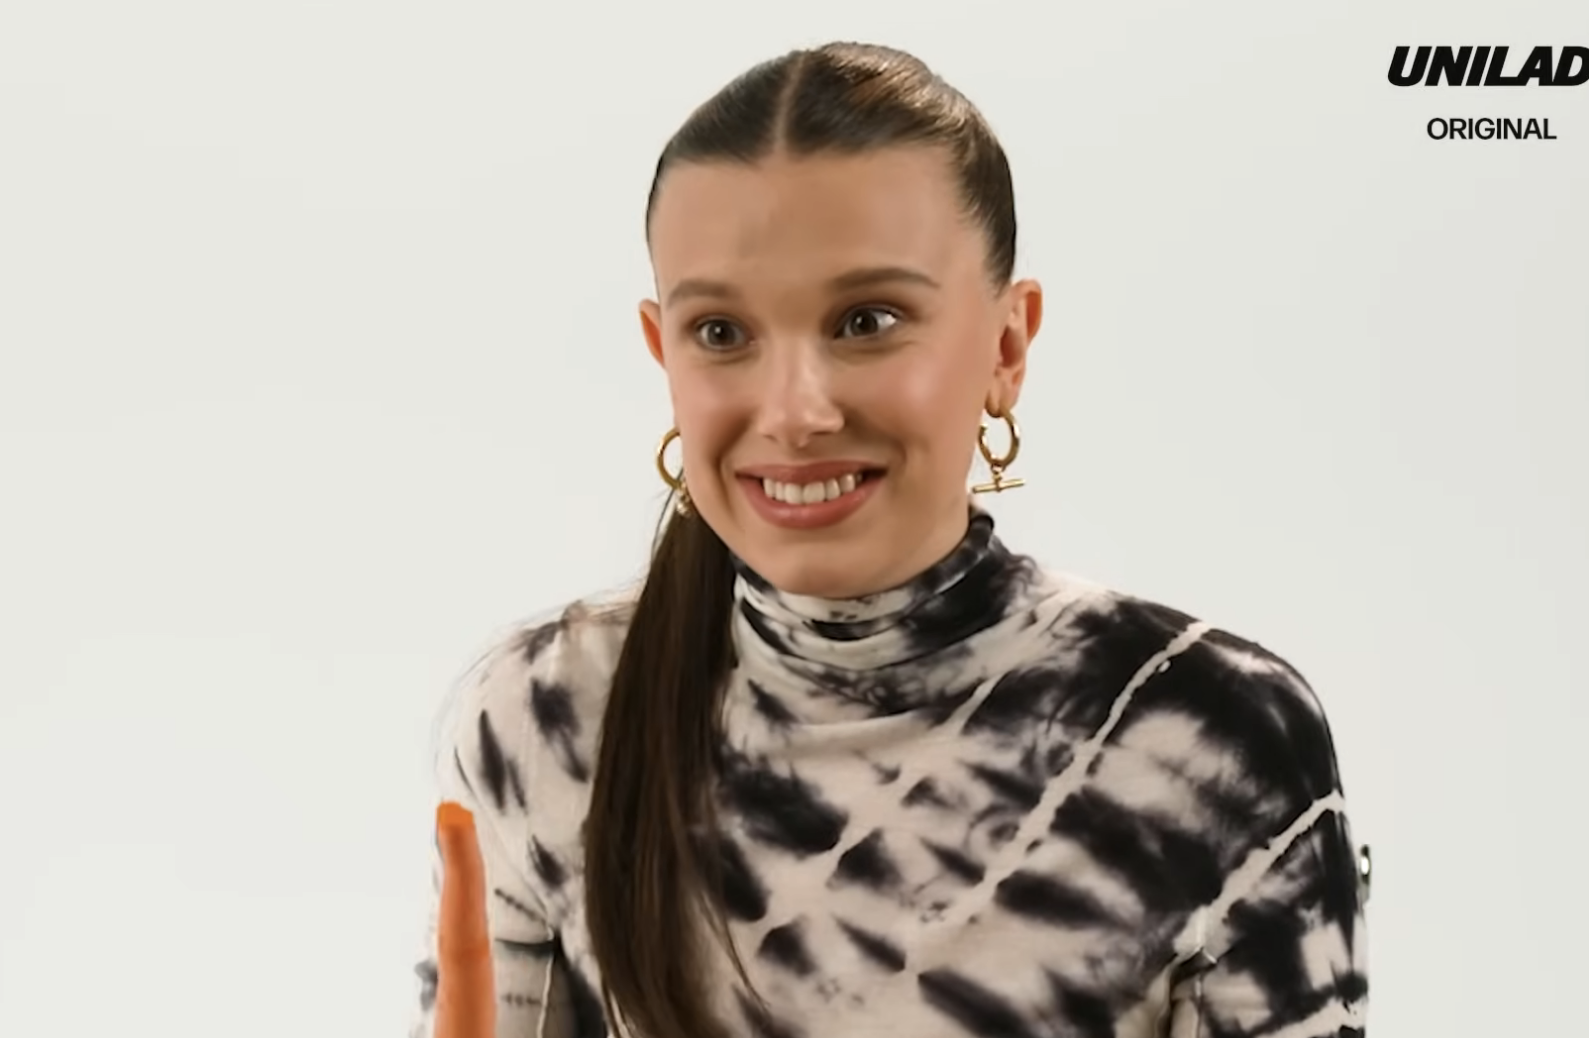 Millie Bobby Brown smiling in a spotted top, holding a carrot